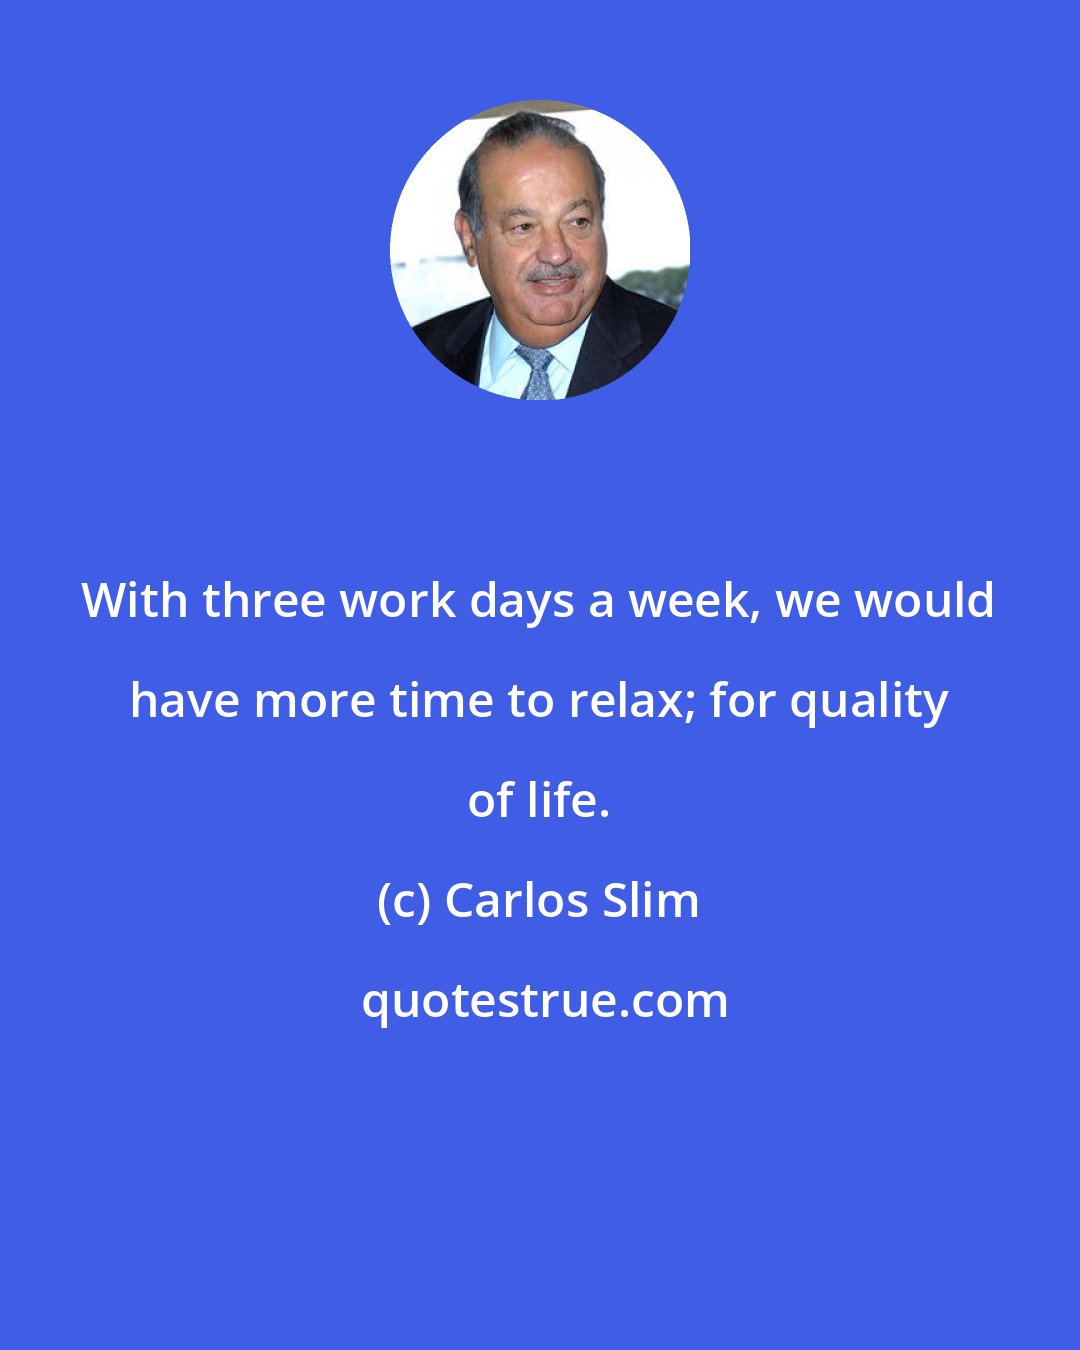 Carlos Slim: With three work days a week, we would have more time to relax; for quality of life.